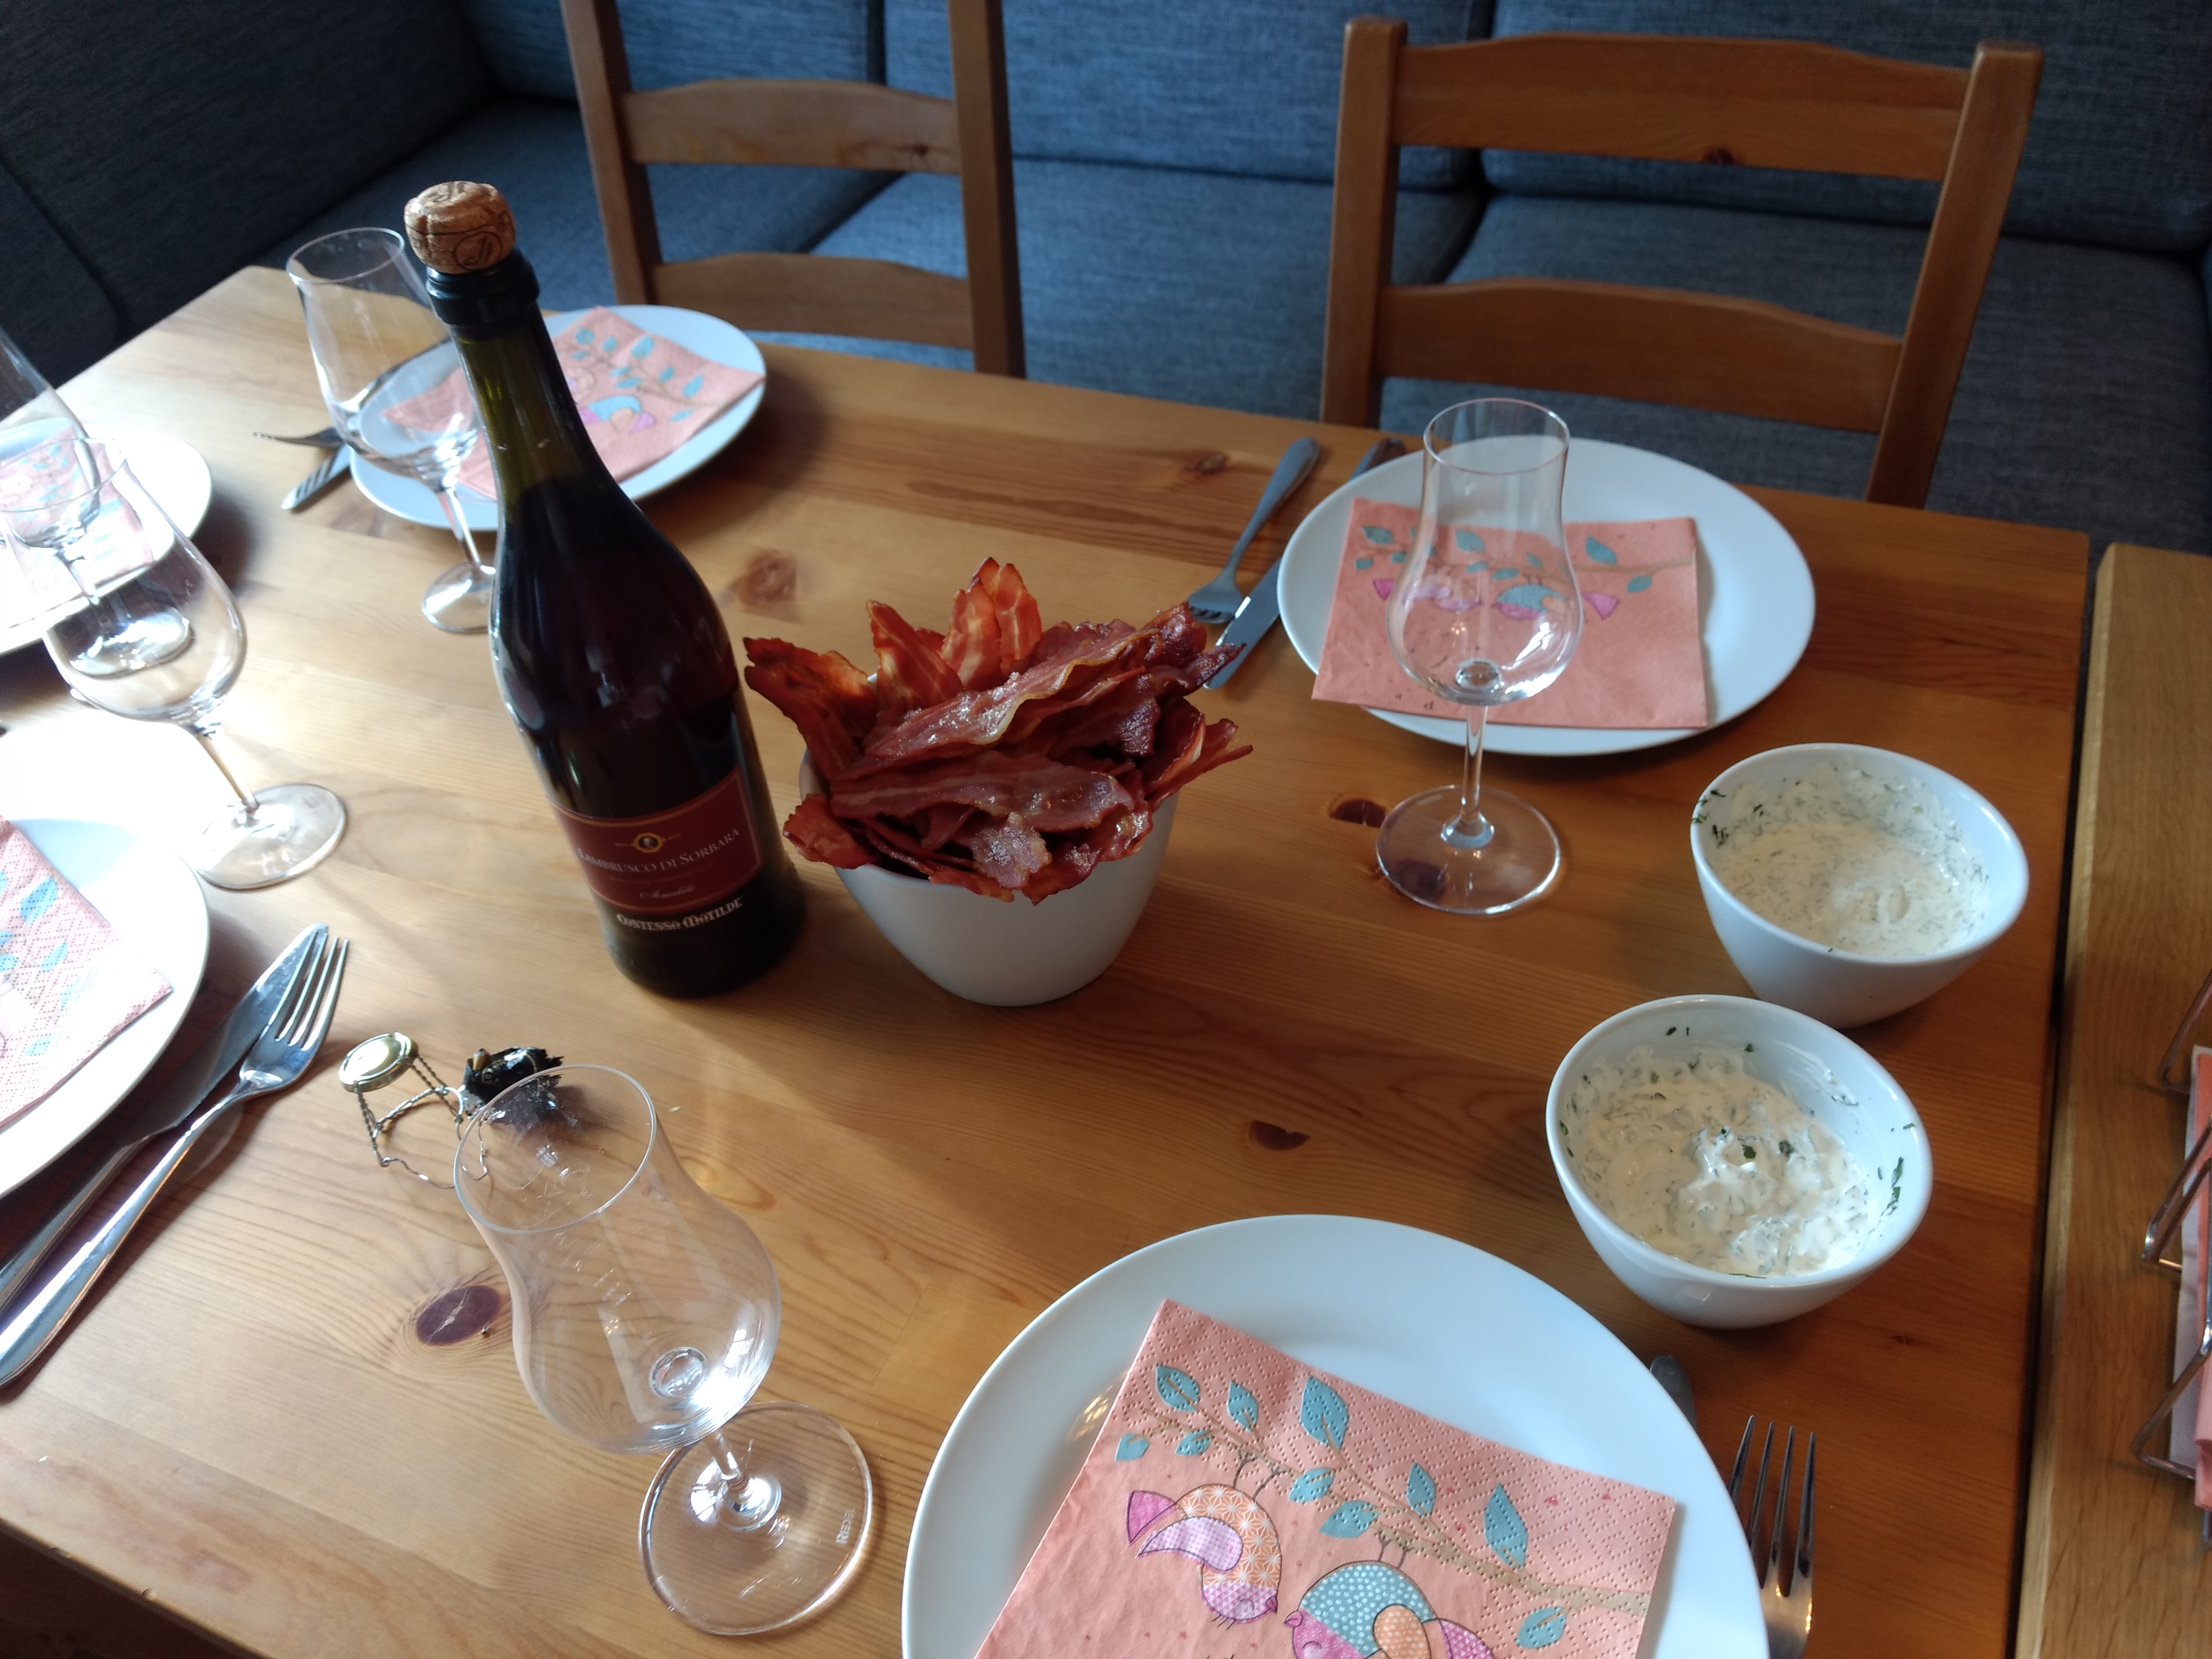 Bacon, dip and lambrusco